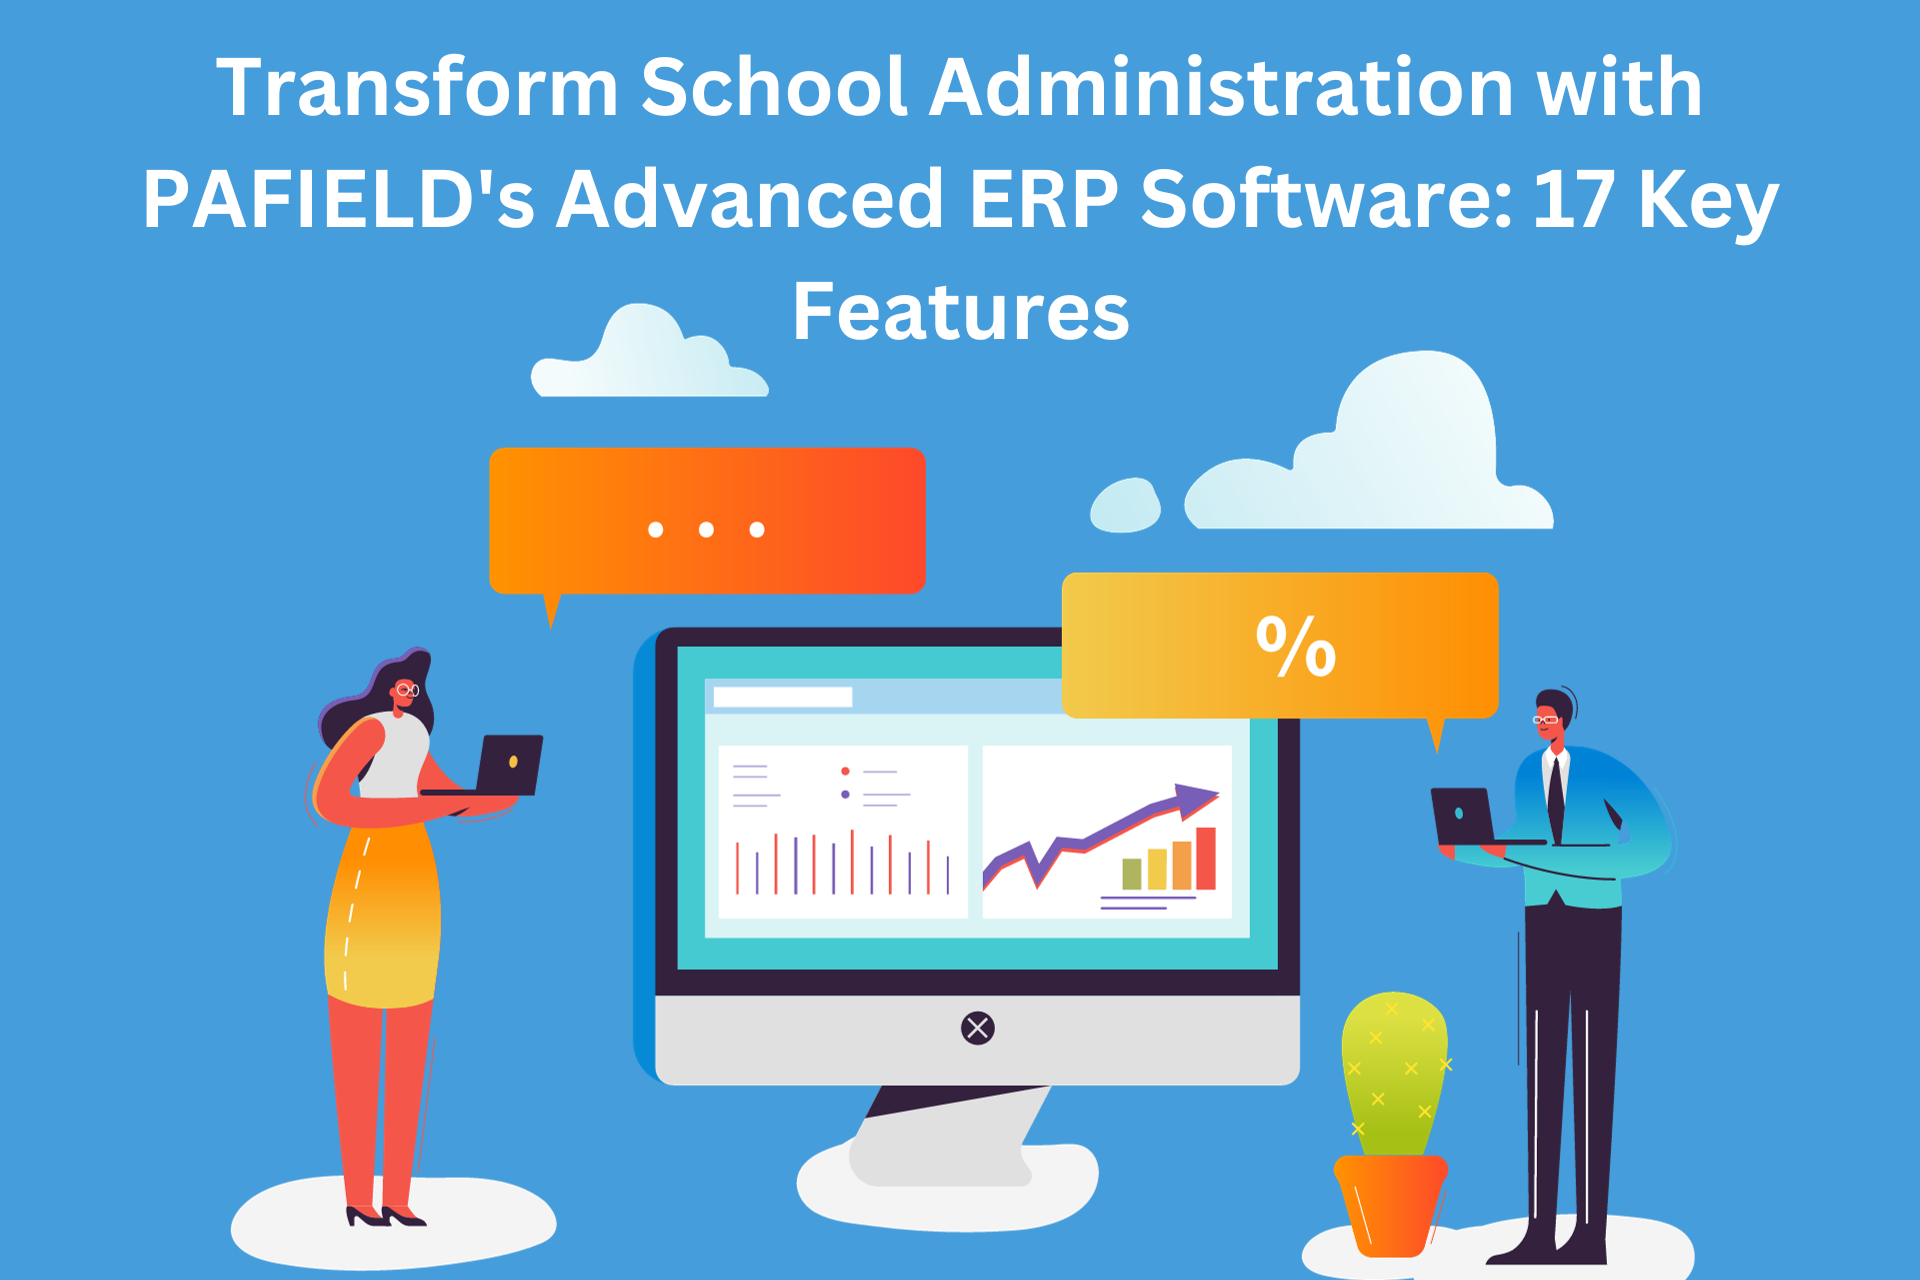 Transform School Administration with PAFIELD's Advanced ERP Software 17 Key Features